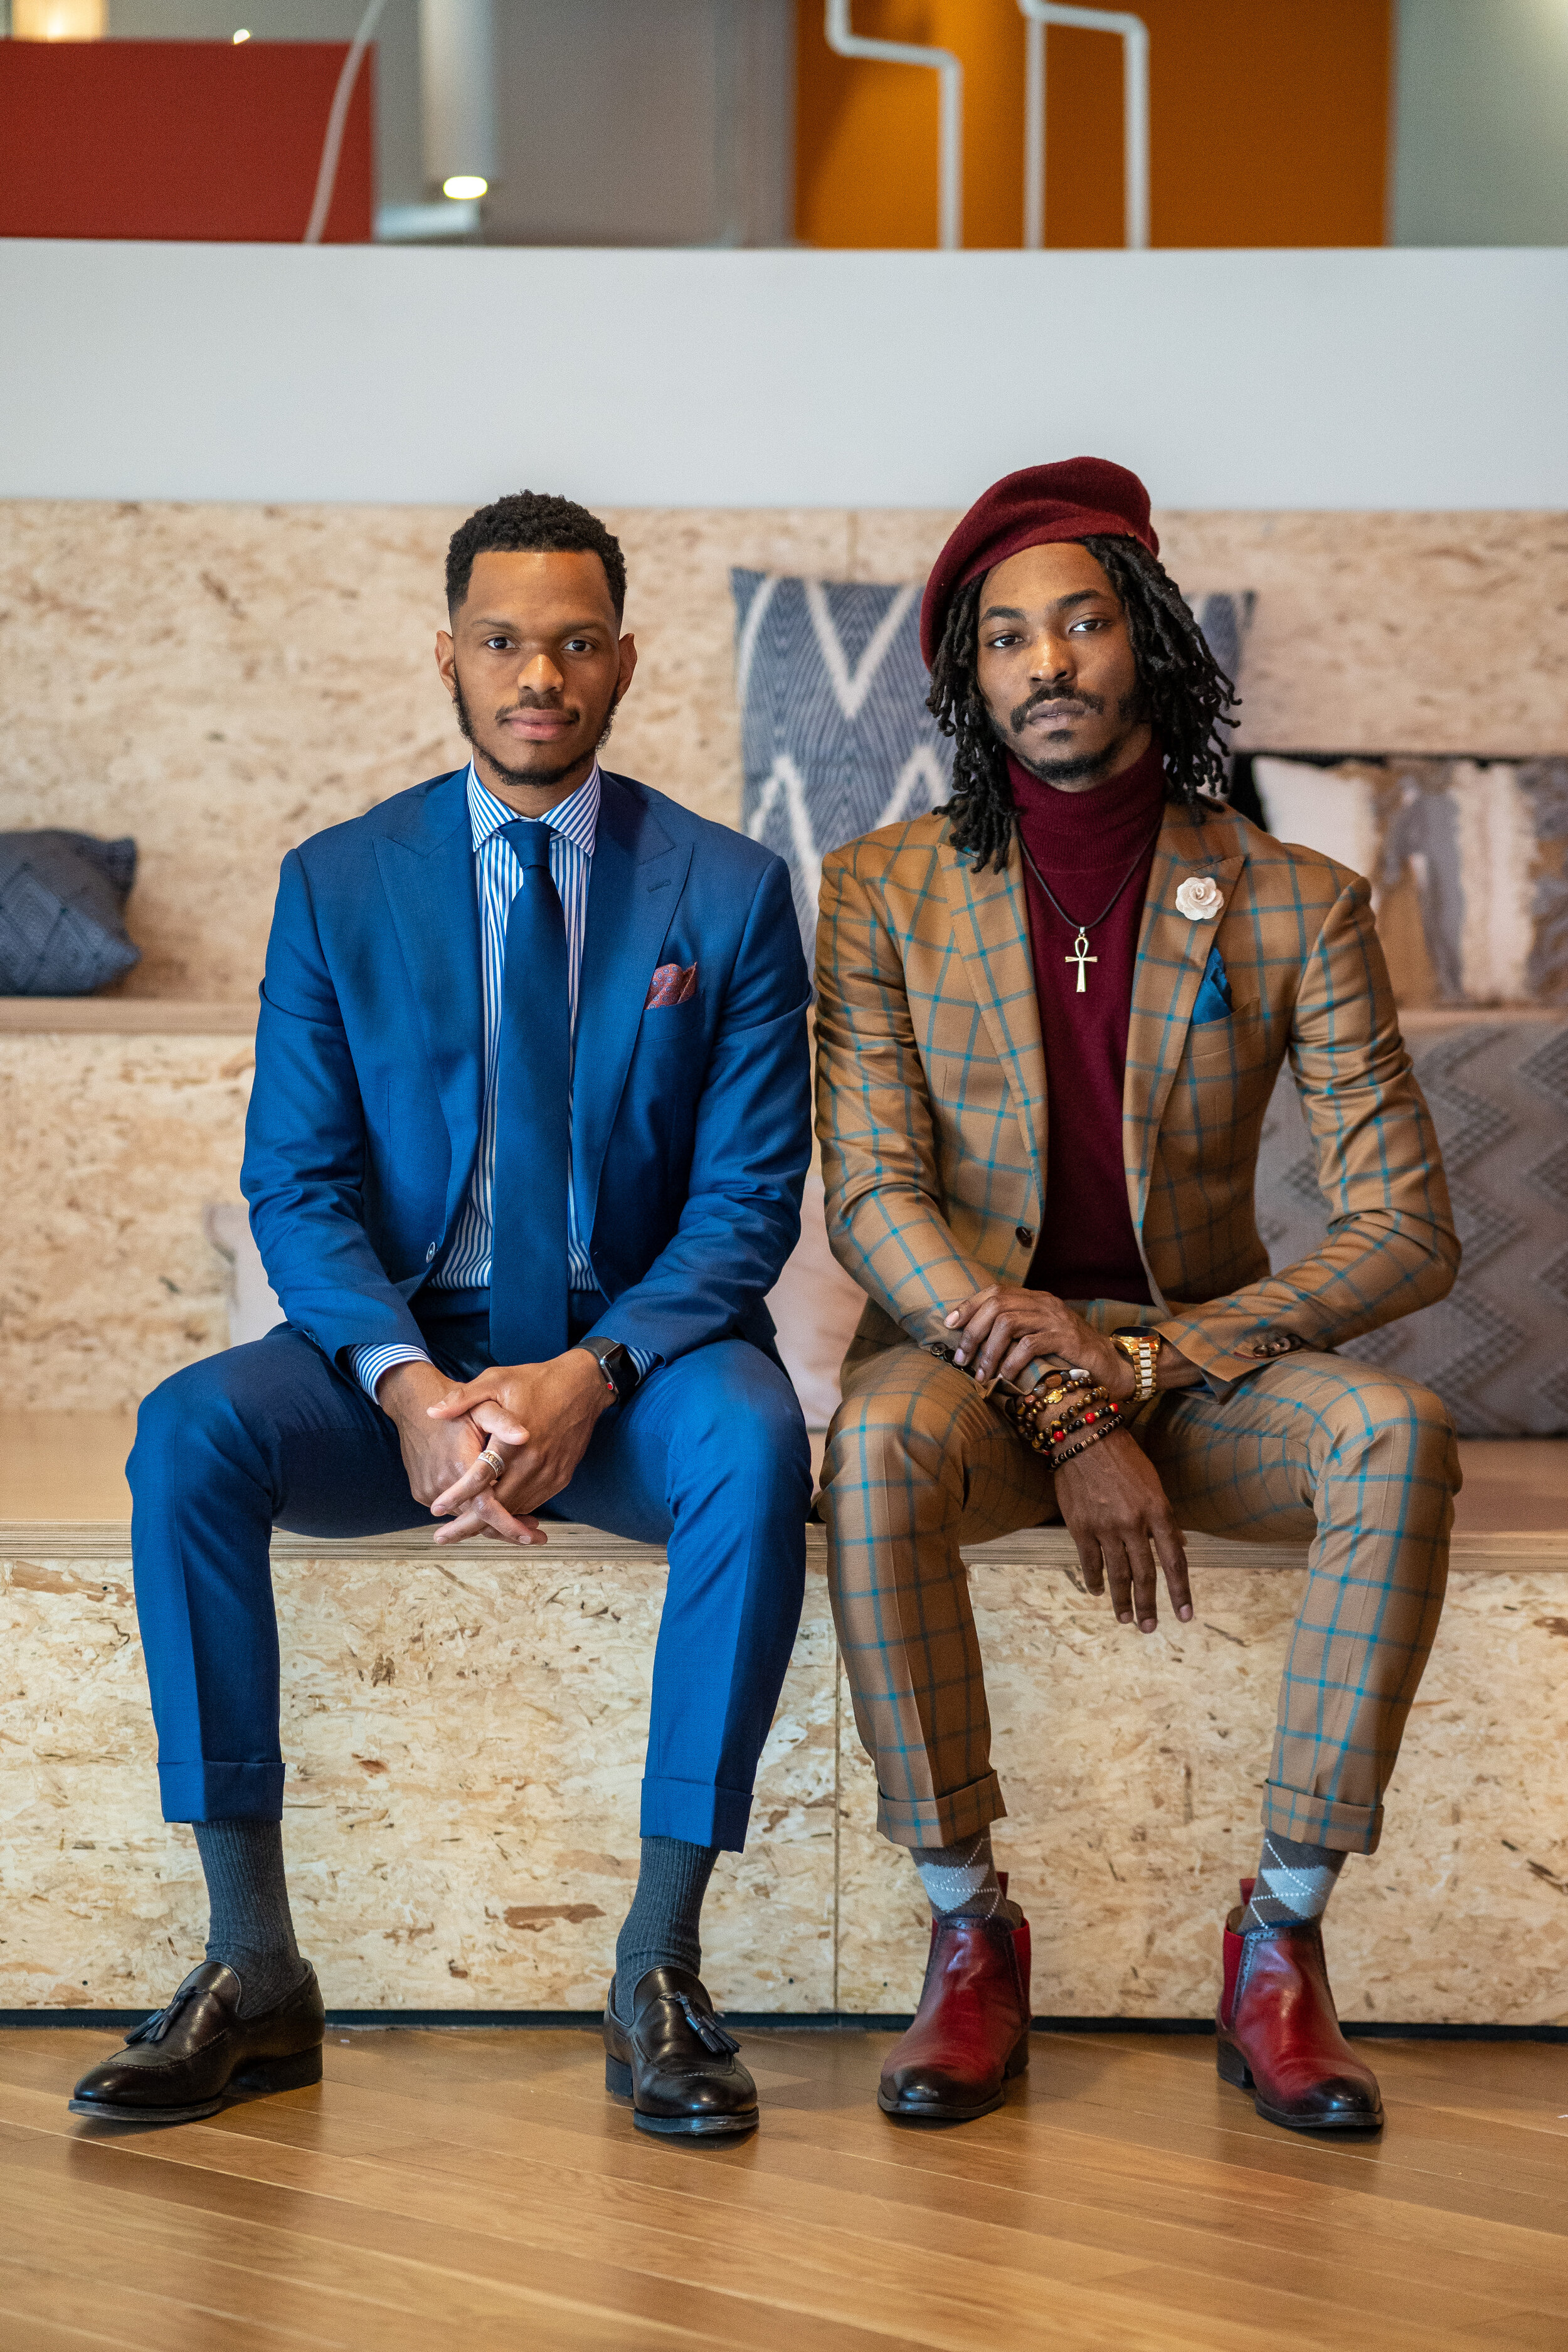 The Co-Founders of Xavi Rowe Bespoke describe their experiences with diversity at work.